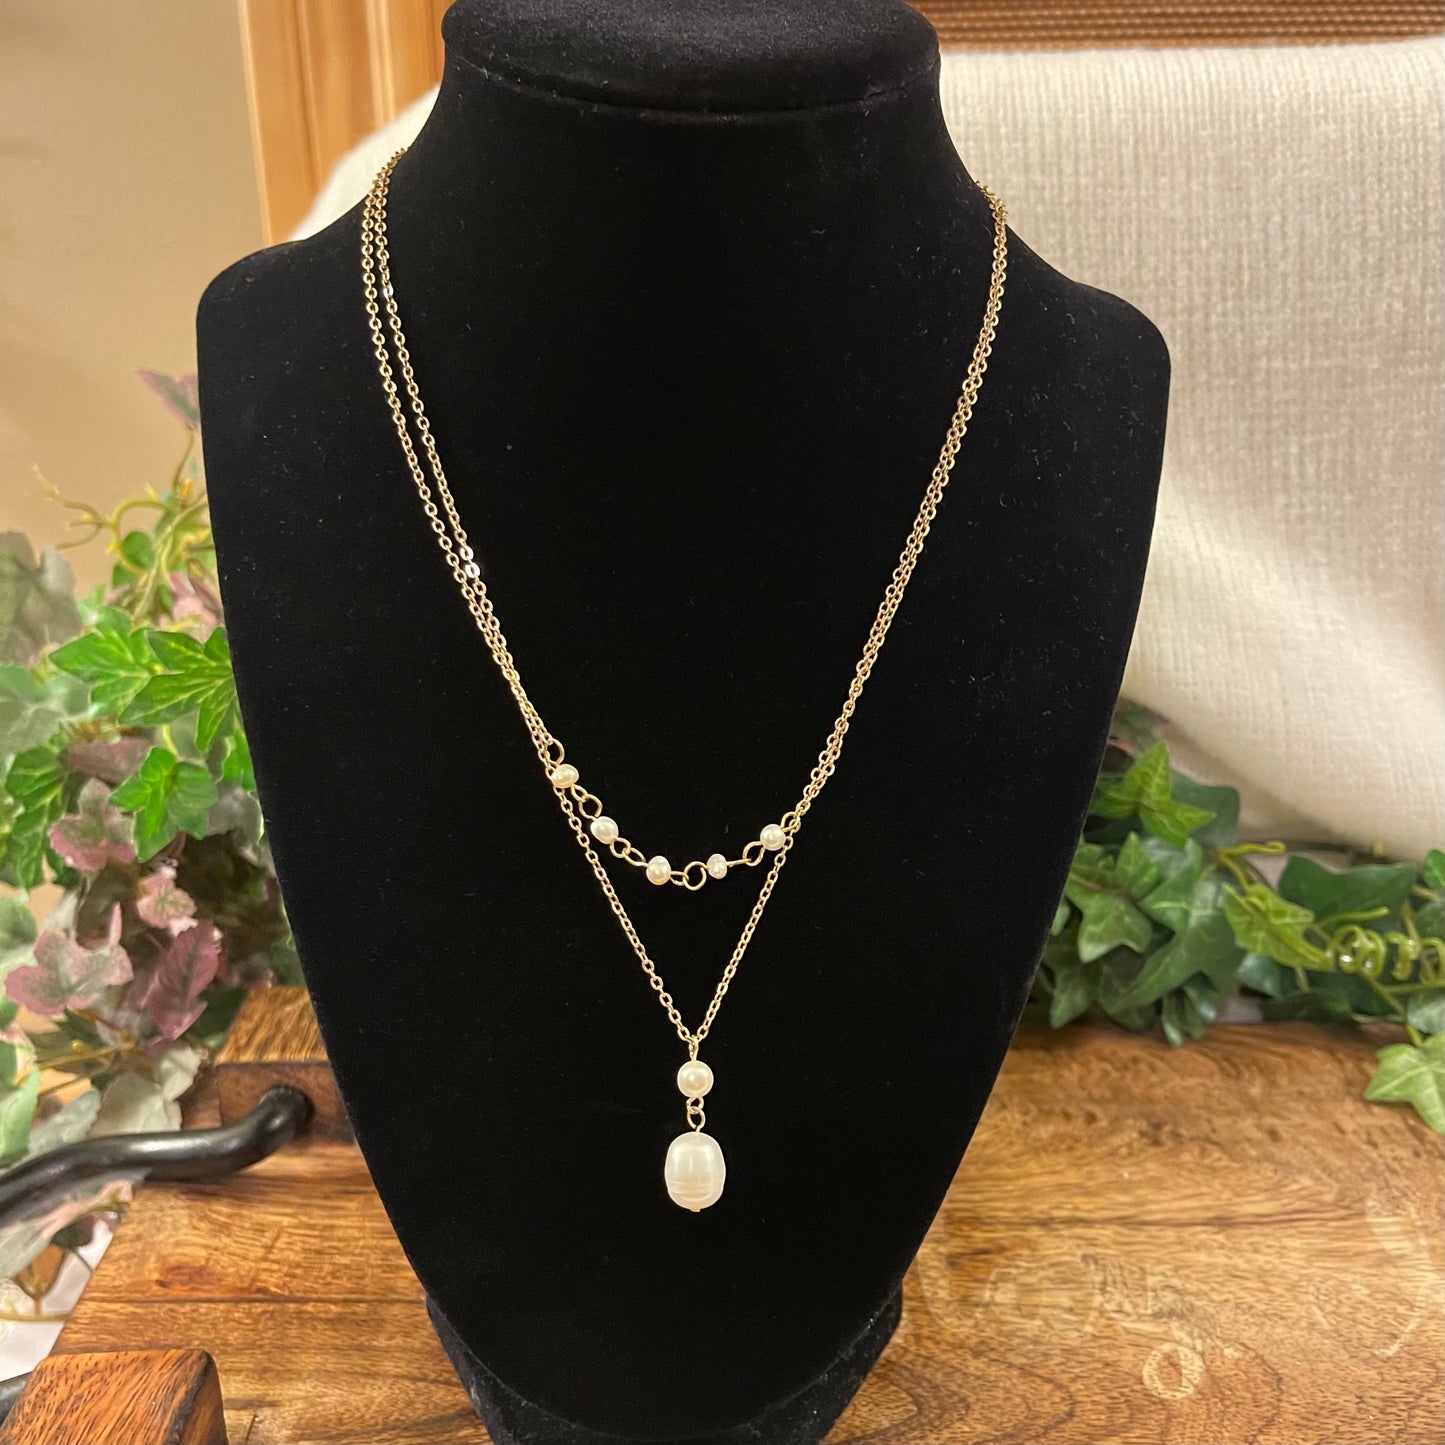 Layered Goldtone Metal Necklace with Pearl Pendant